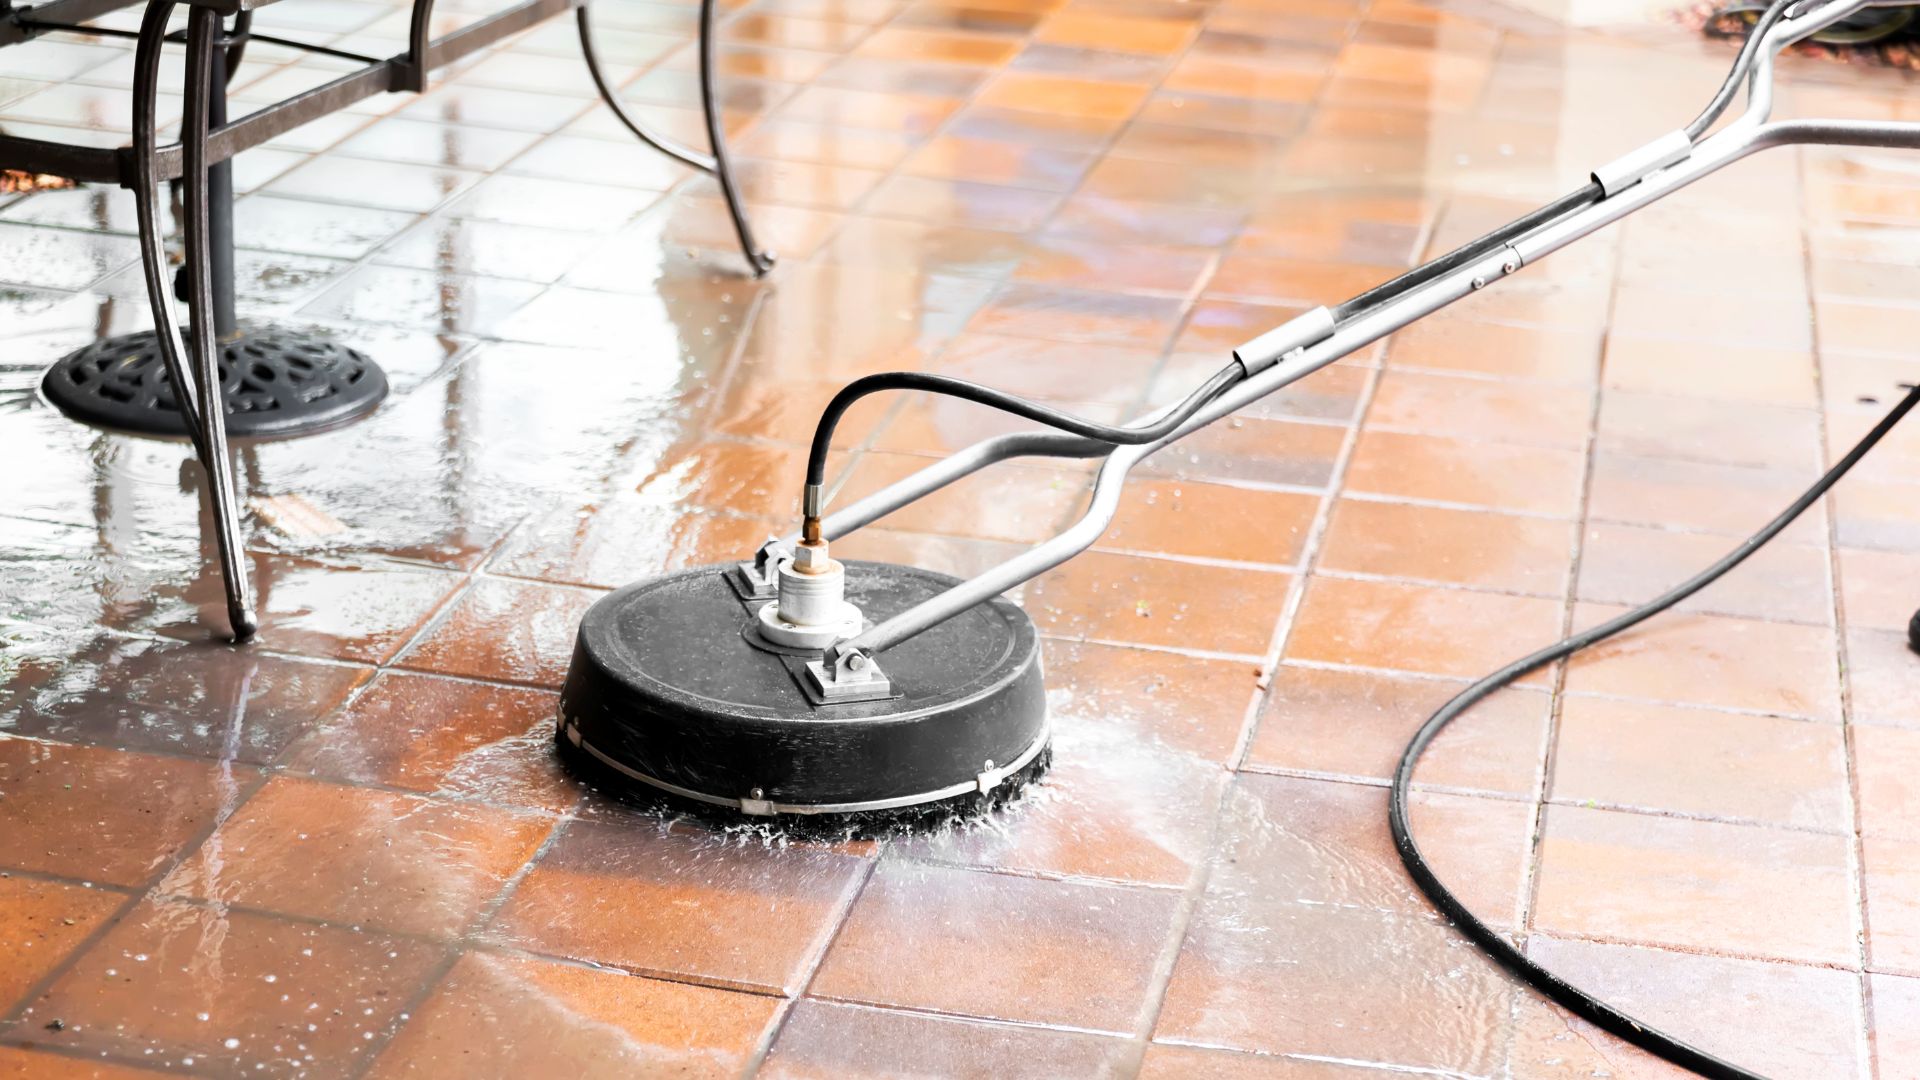 https://nextdaycleaning.com/wp-content/uploads/2022/11/How-much-is-commercial-tile-cleaning.jpg